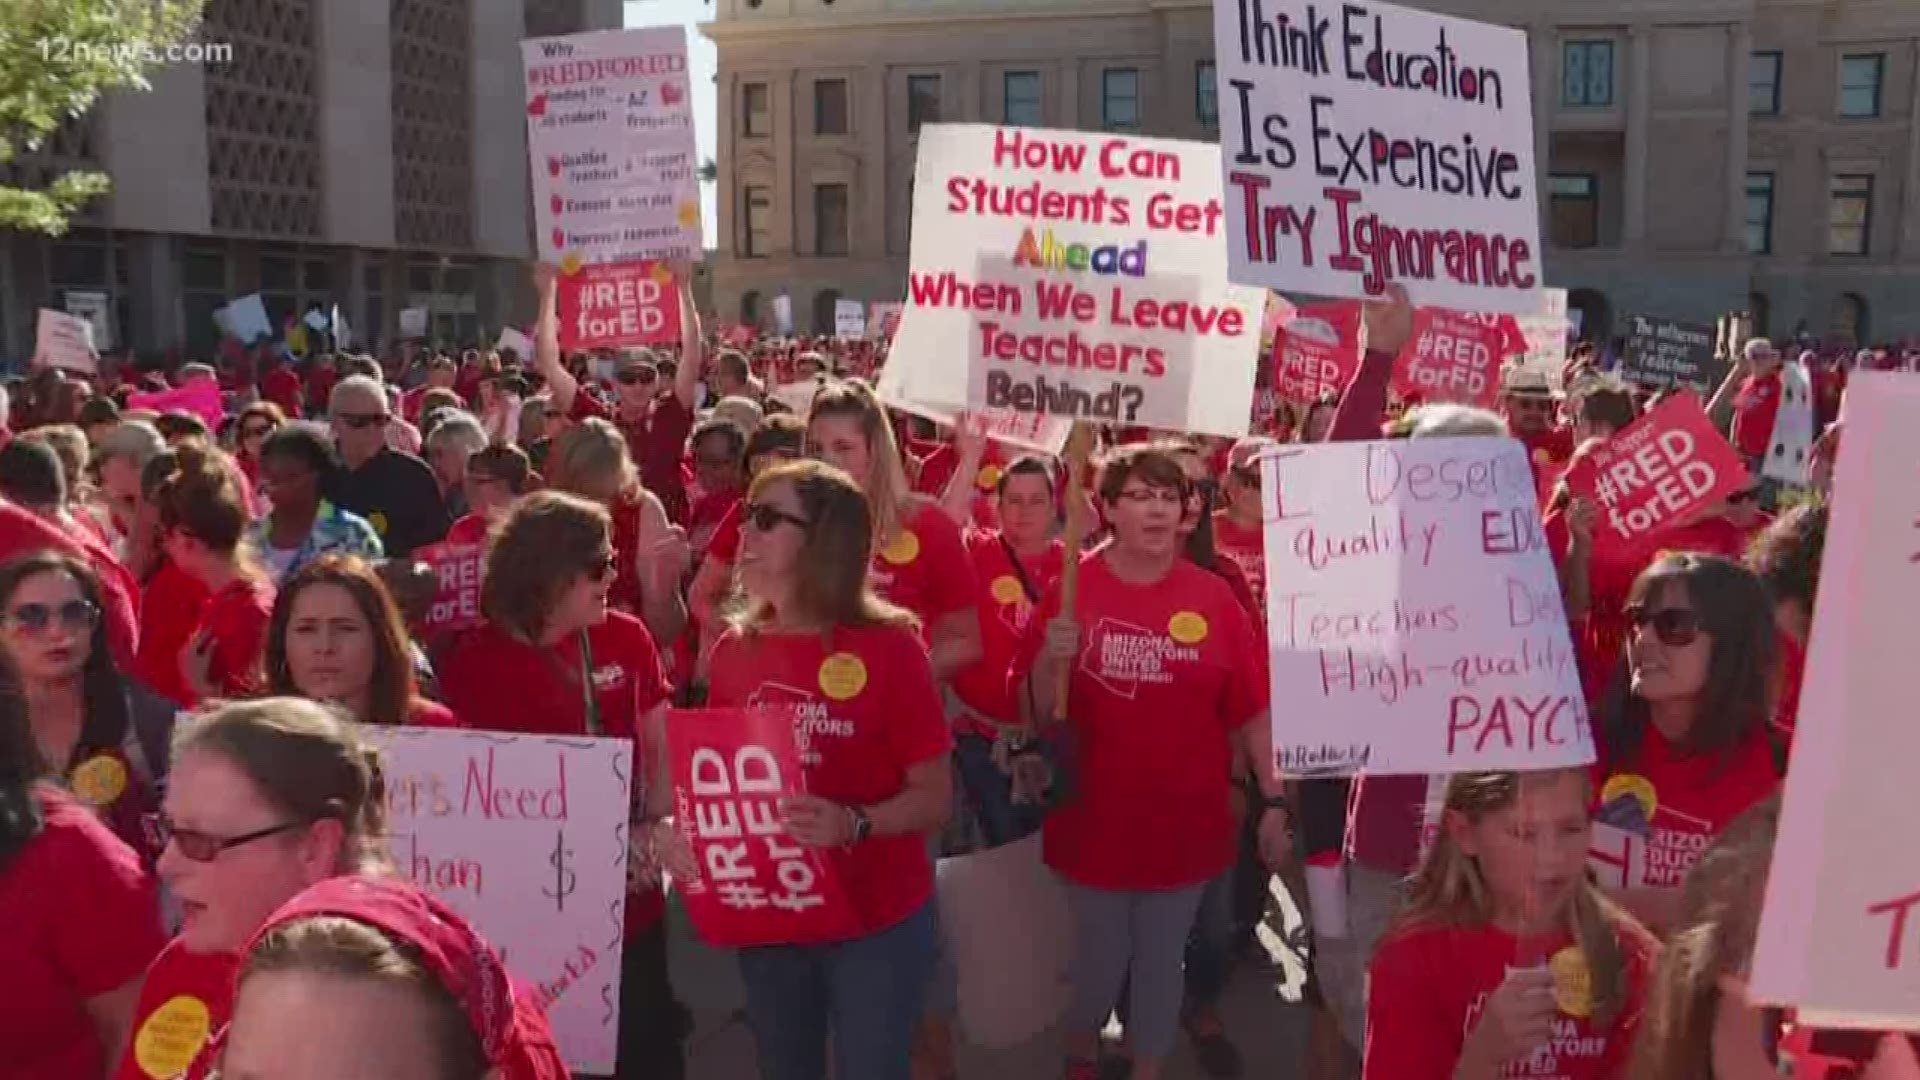 Governor Ducey's plan isn't enough to aid all reforms teacher demand for better education in Arizona.